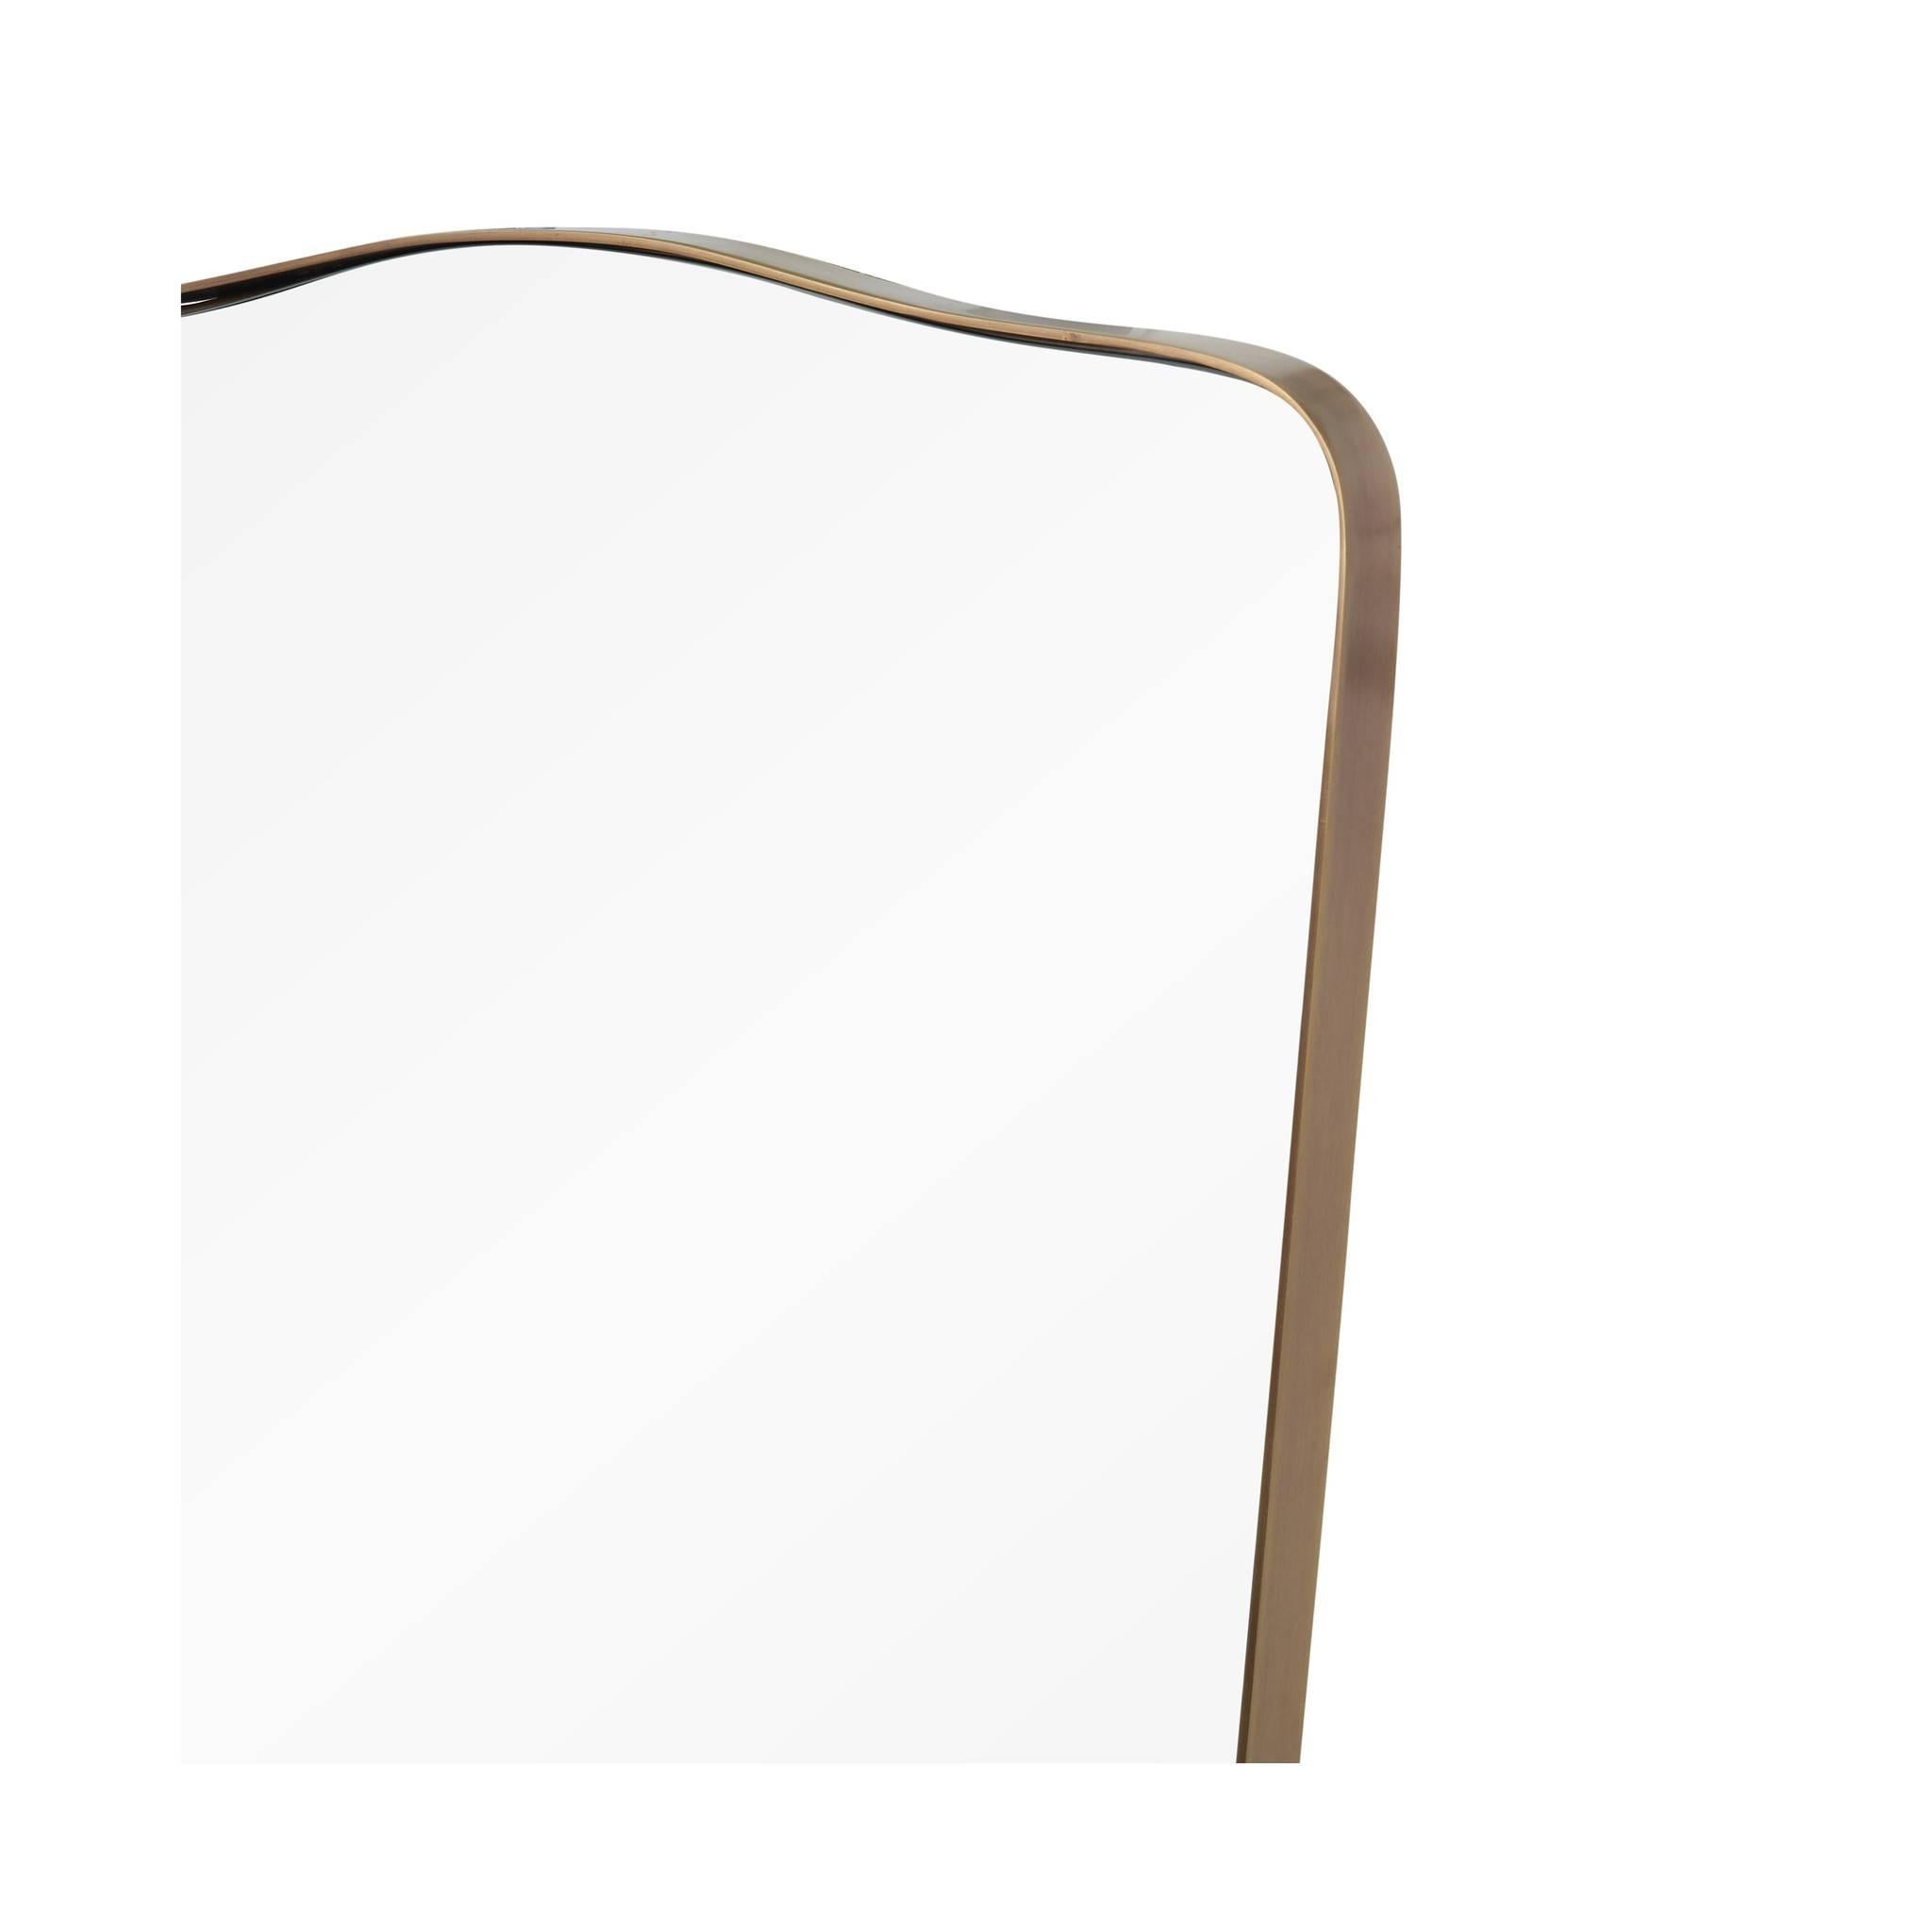 Italian modern-inspired mirror series available in an antique brass finish.